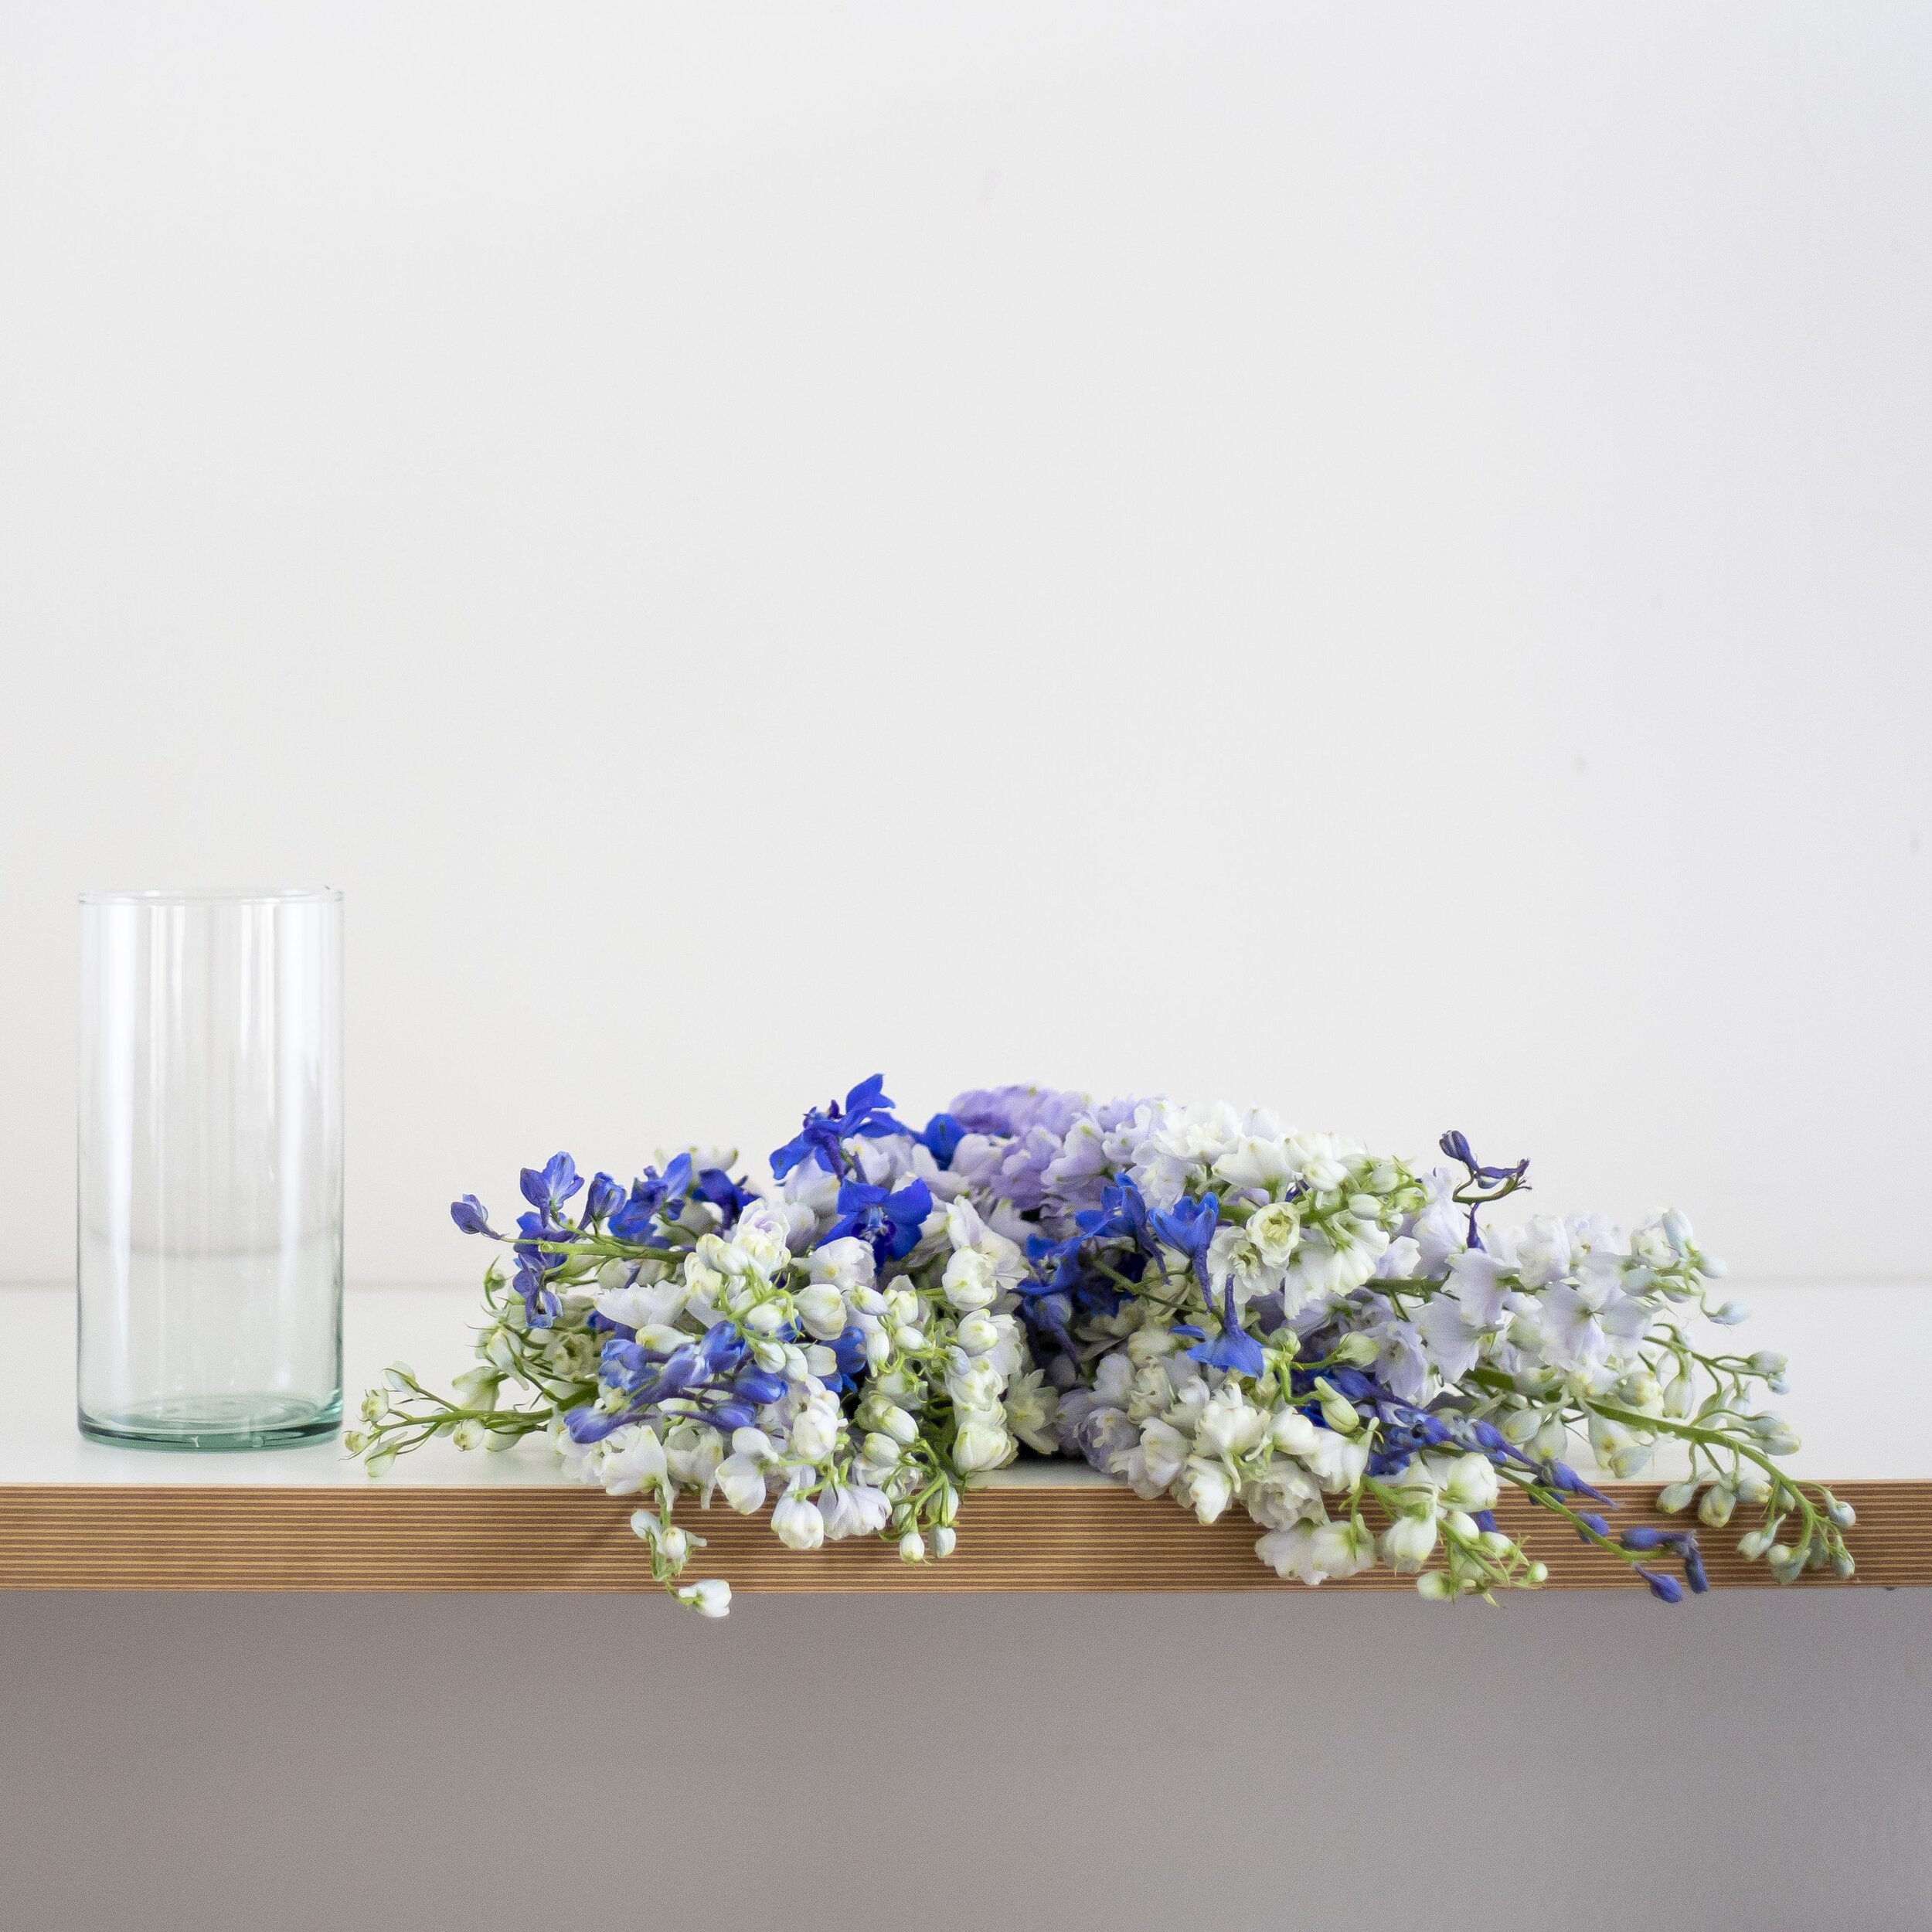 Light purple, purple, and bold blue stems of delphinium laying flat with a glass vase next to them